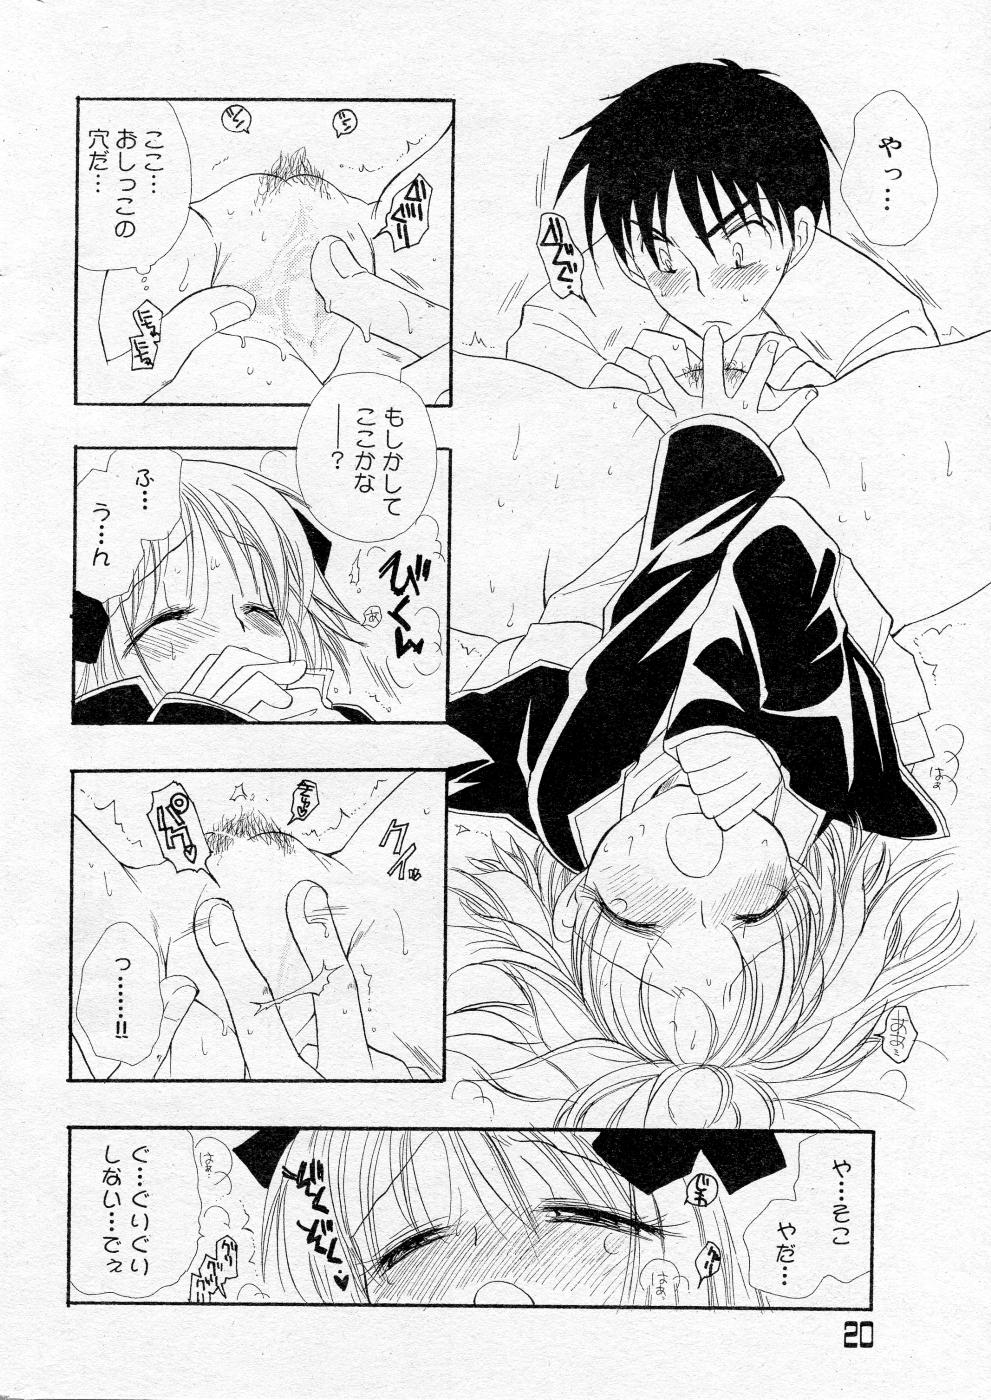 COMIC Angel Share Vol. 01 page 17 full